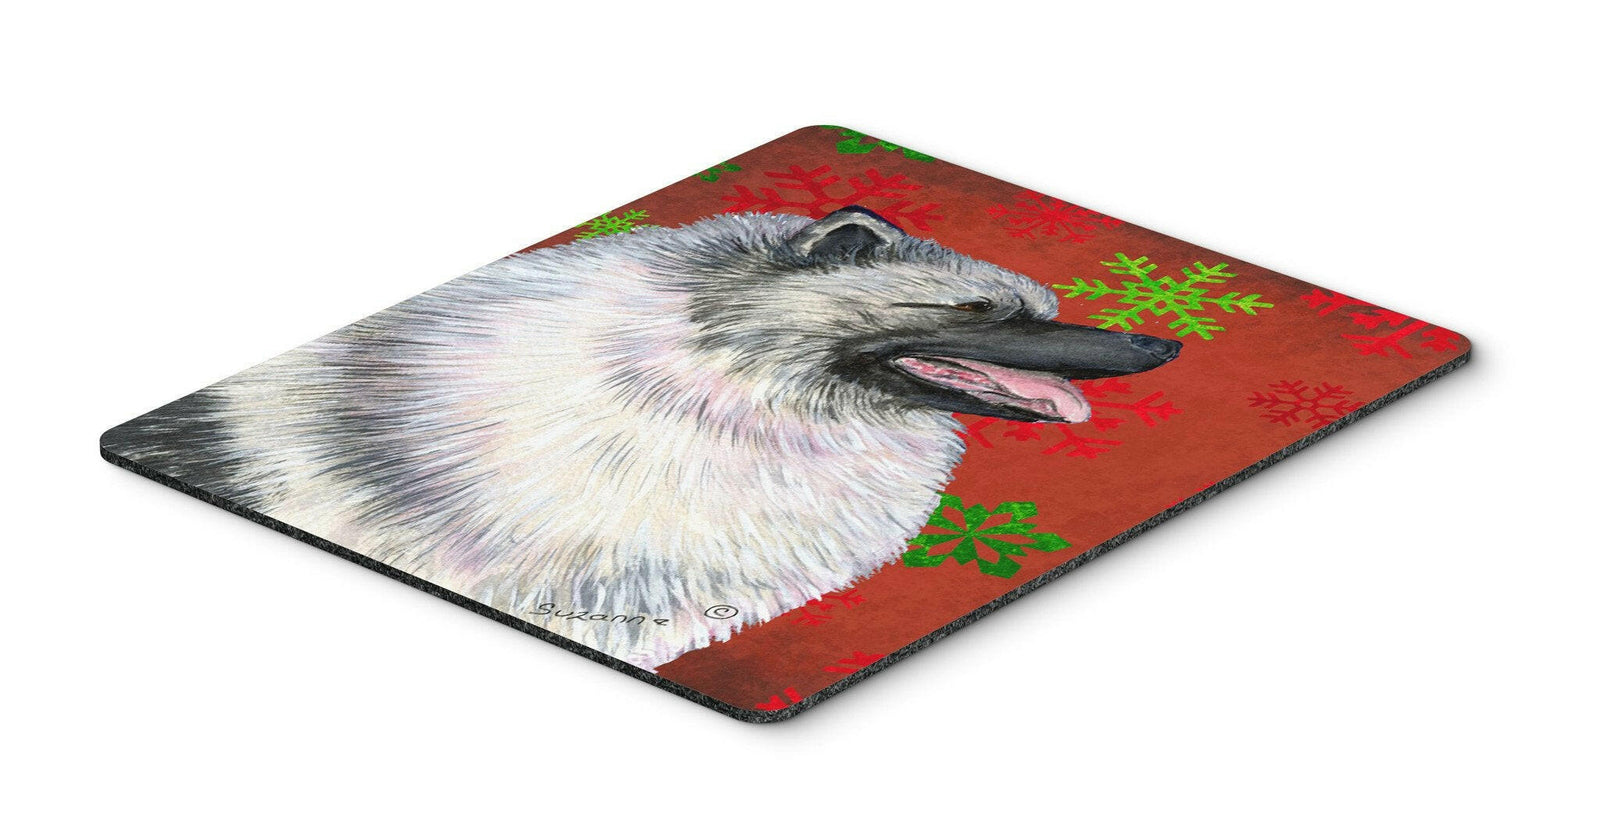 Keeshond Red and Green Snowflakes Christmas Mouse Pad, Hot Pad or Trivet by Caroline's Treasures